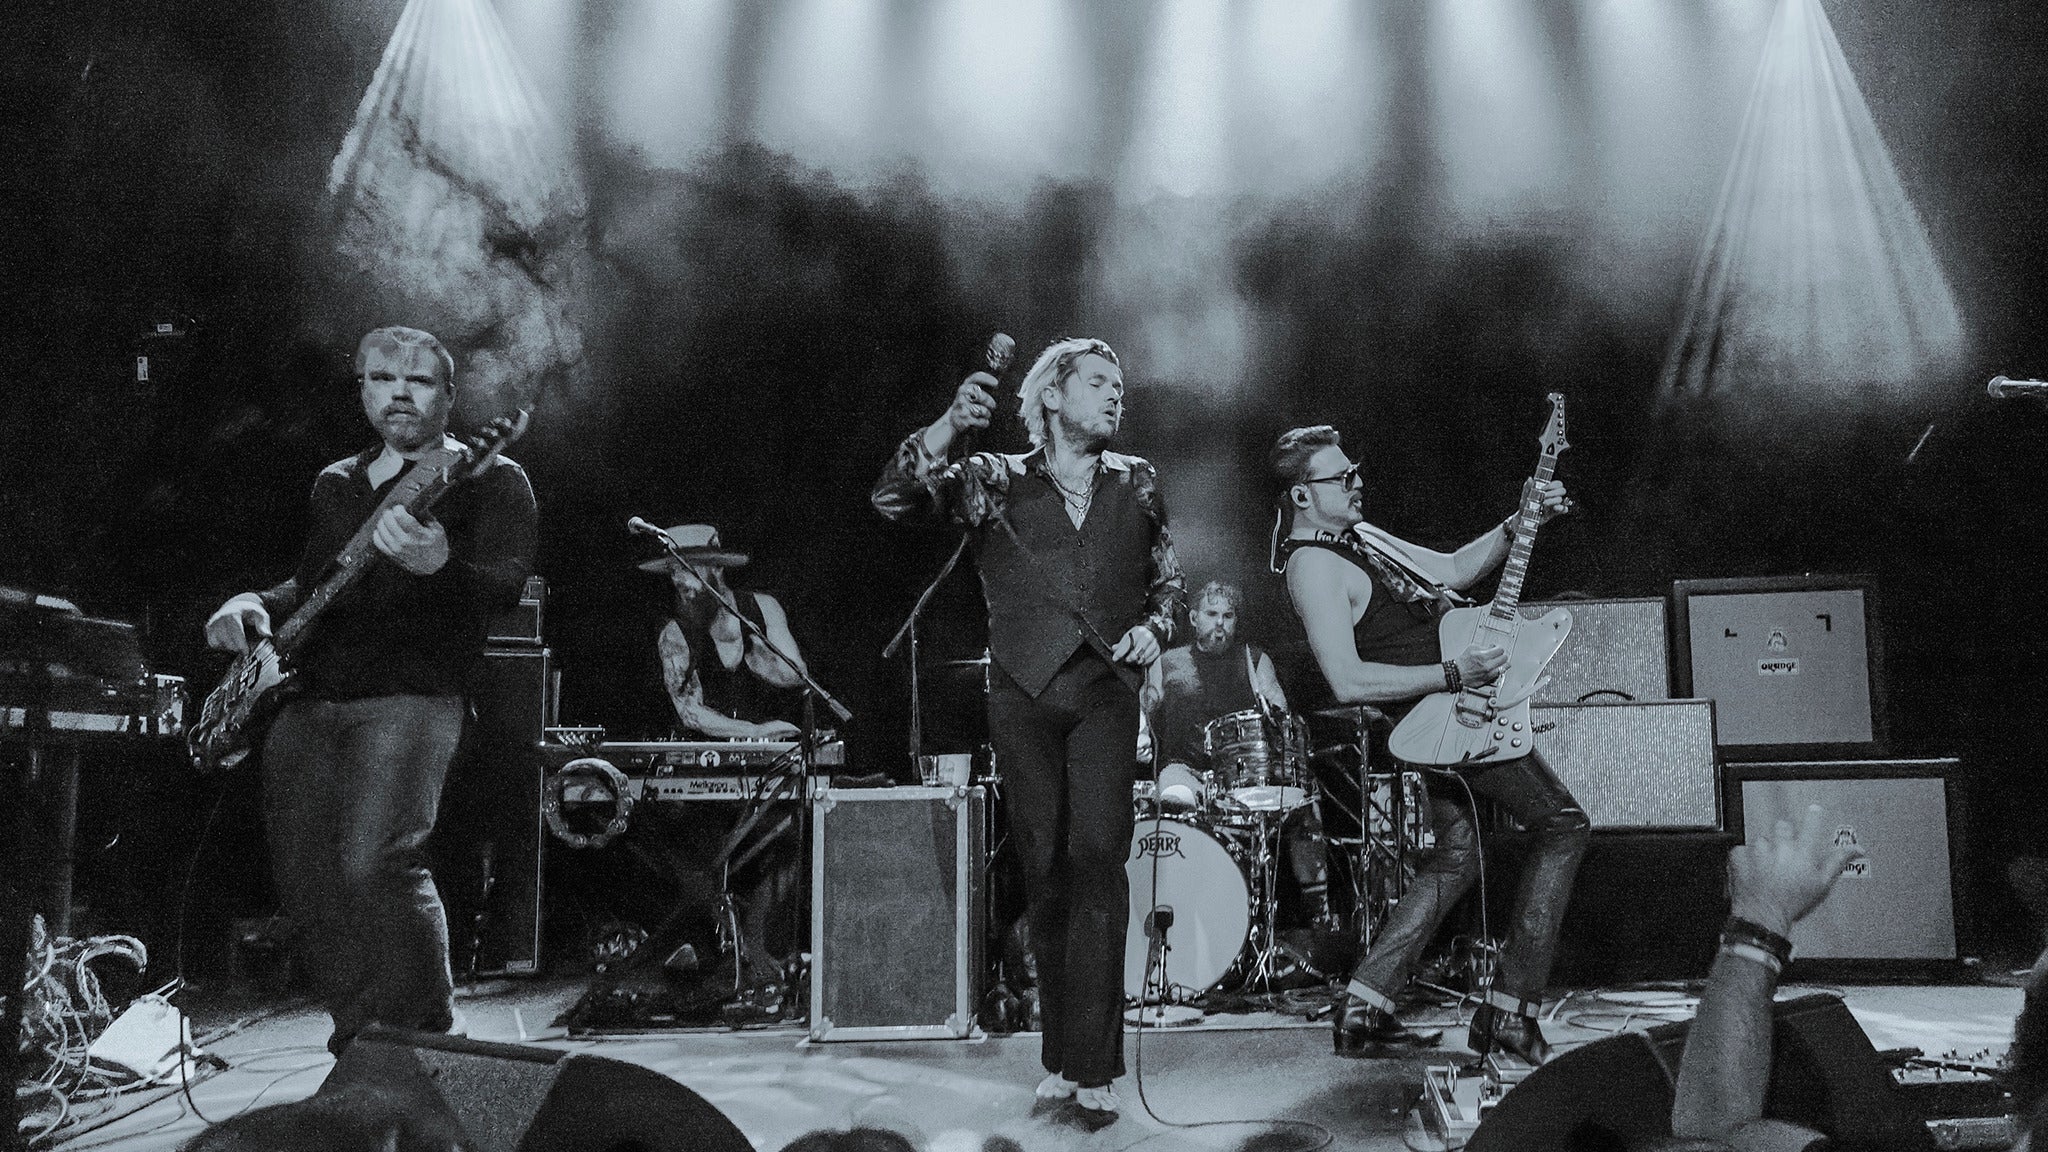 Rival Sons with Dorothy in New Orleans promo photo for Official Platinum presale offer code